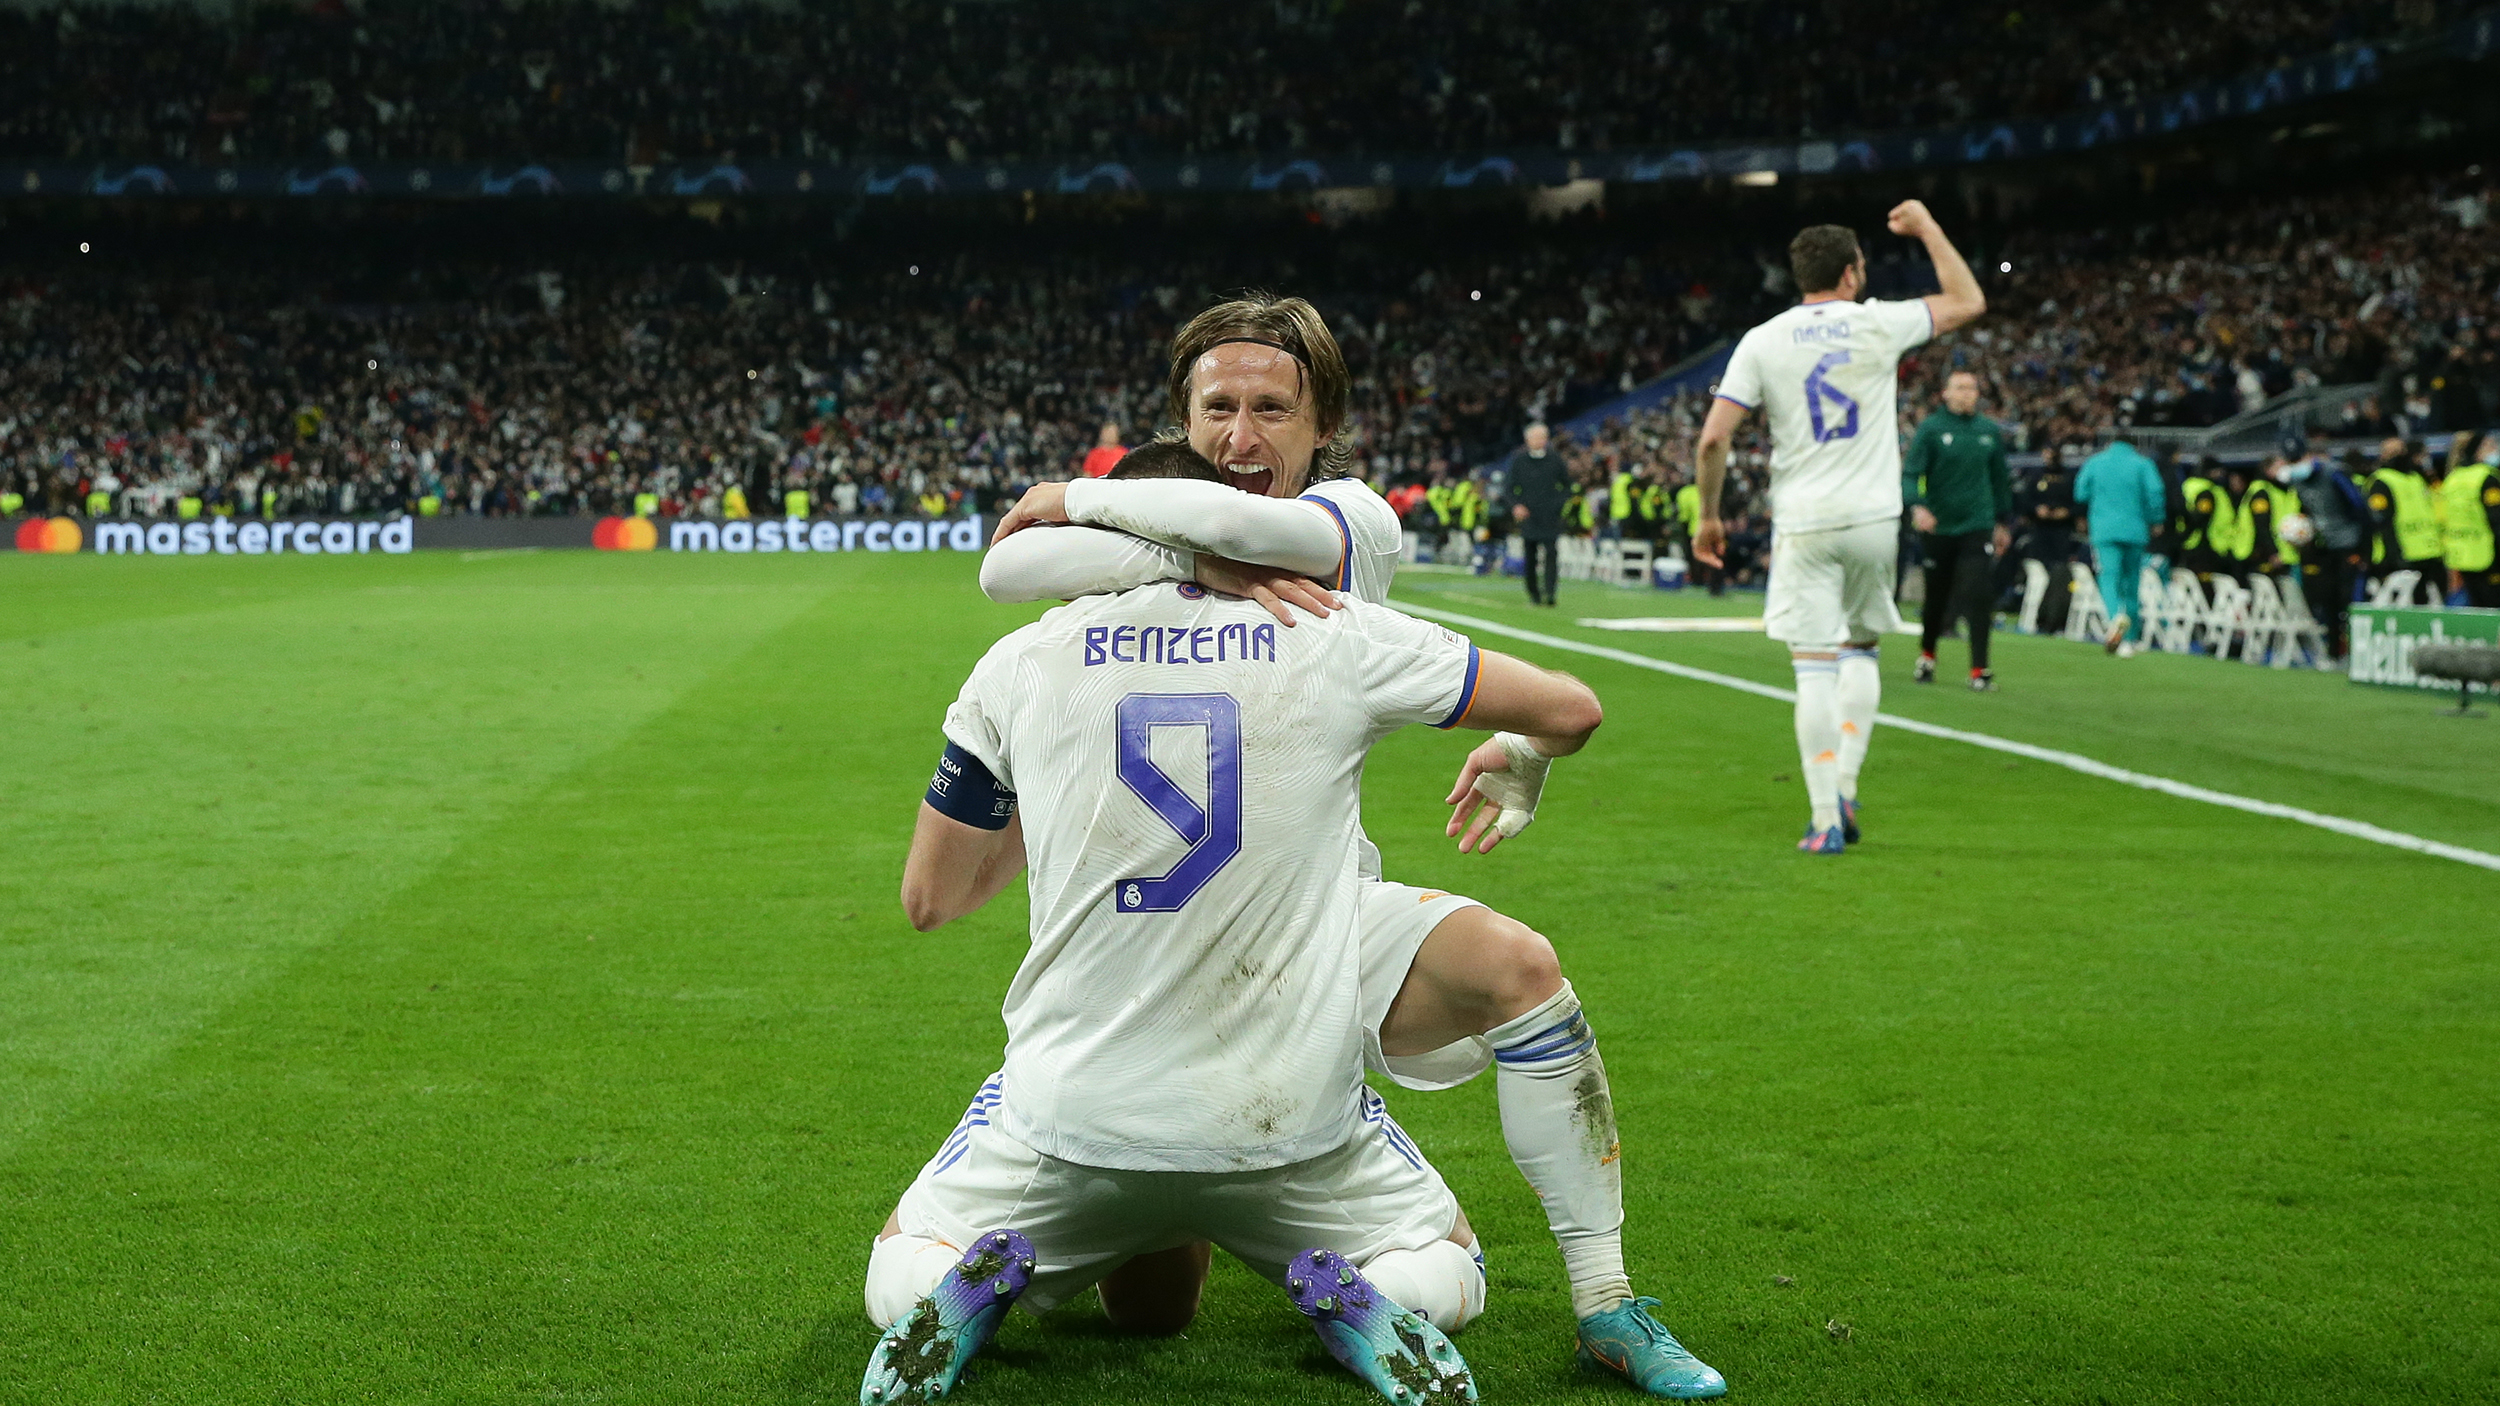 Karim Benzema (L) Real Madrid CF celebrates scoring their third goal with teammate Luka Modric (R) during the UEFA Champions League Round Of Sixteen Leg Two match between Real Madrid and Paris Saint-Germain at Estadio Santiago Bernabeu on March 09, 2022 in Madrid, Spain.